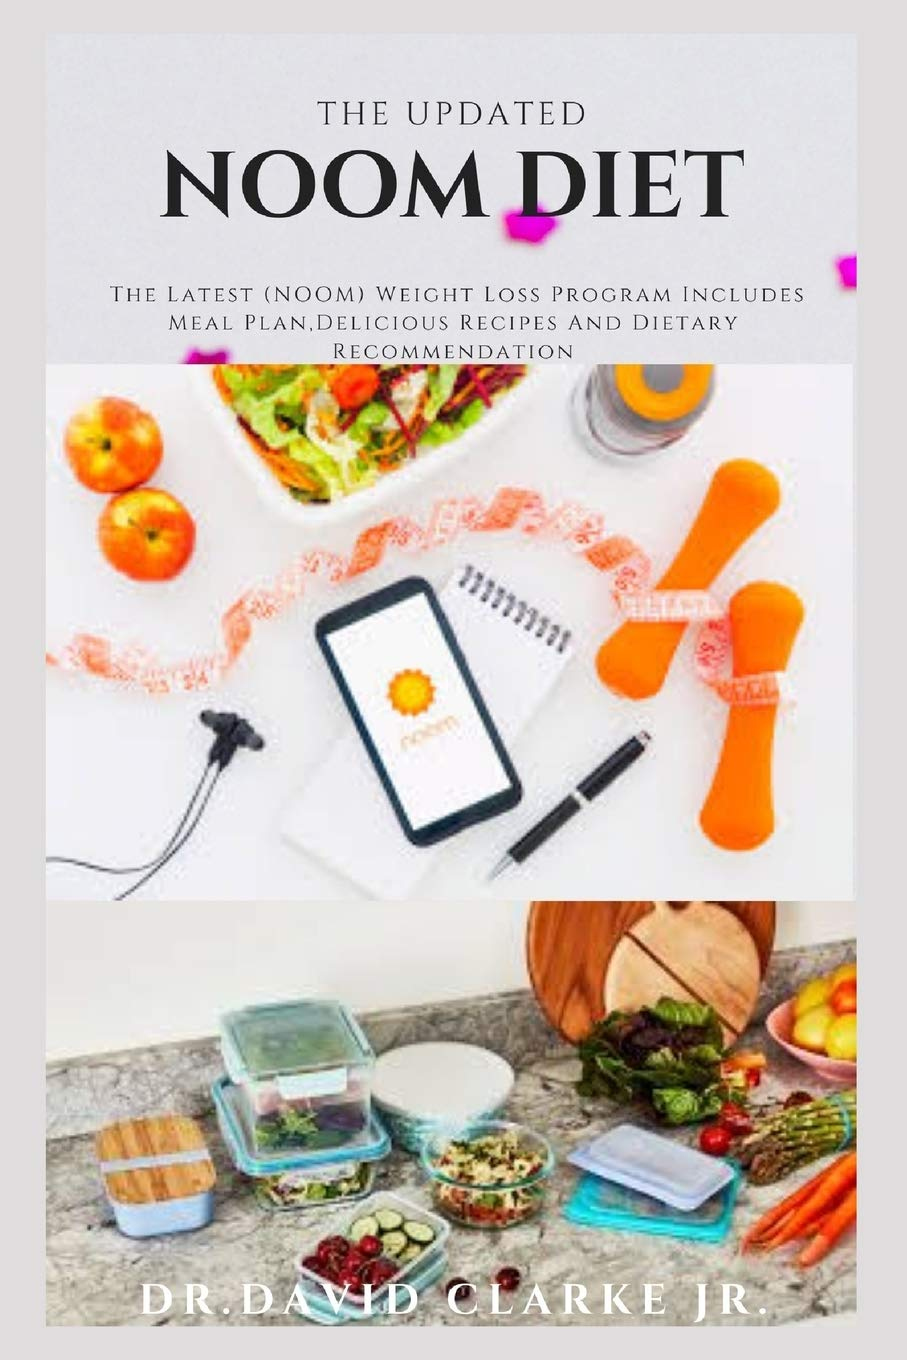 THE UPDATED NOOM DIET The Latest NOOM Weight Loss 